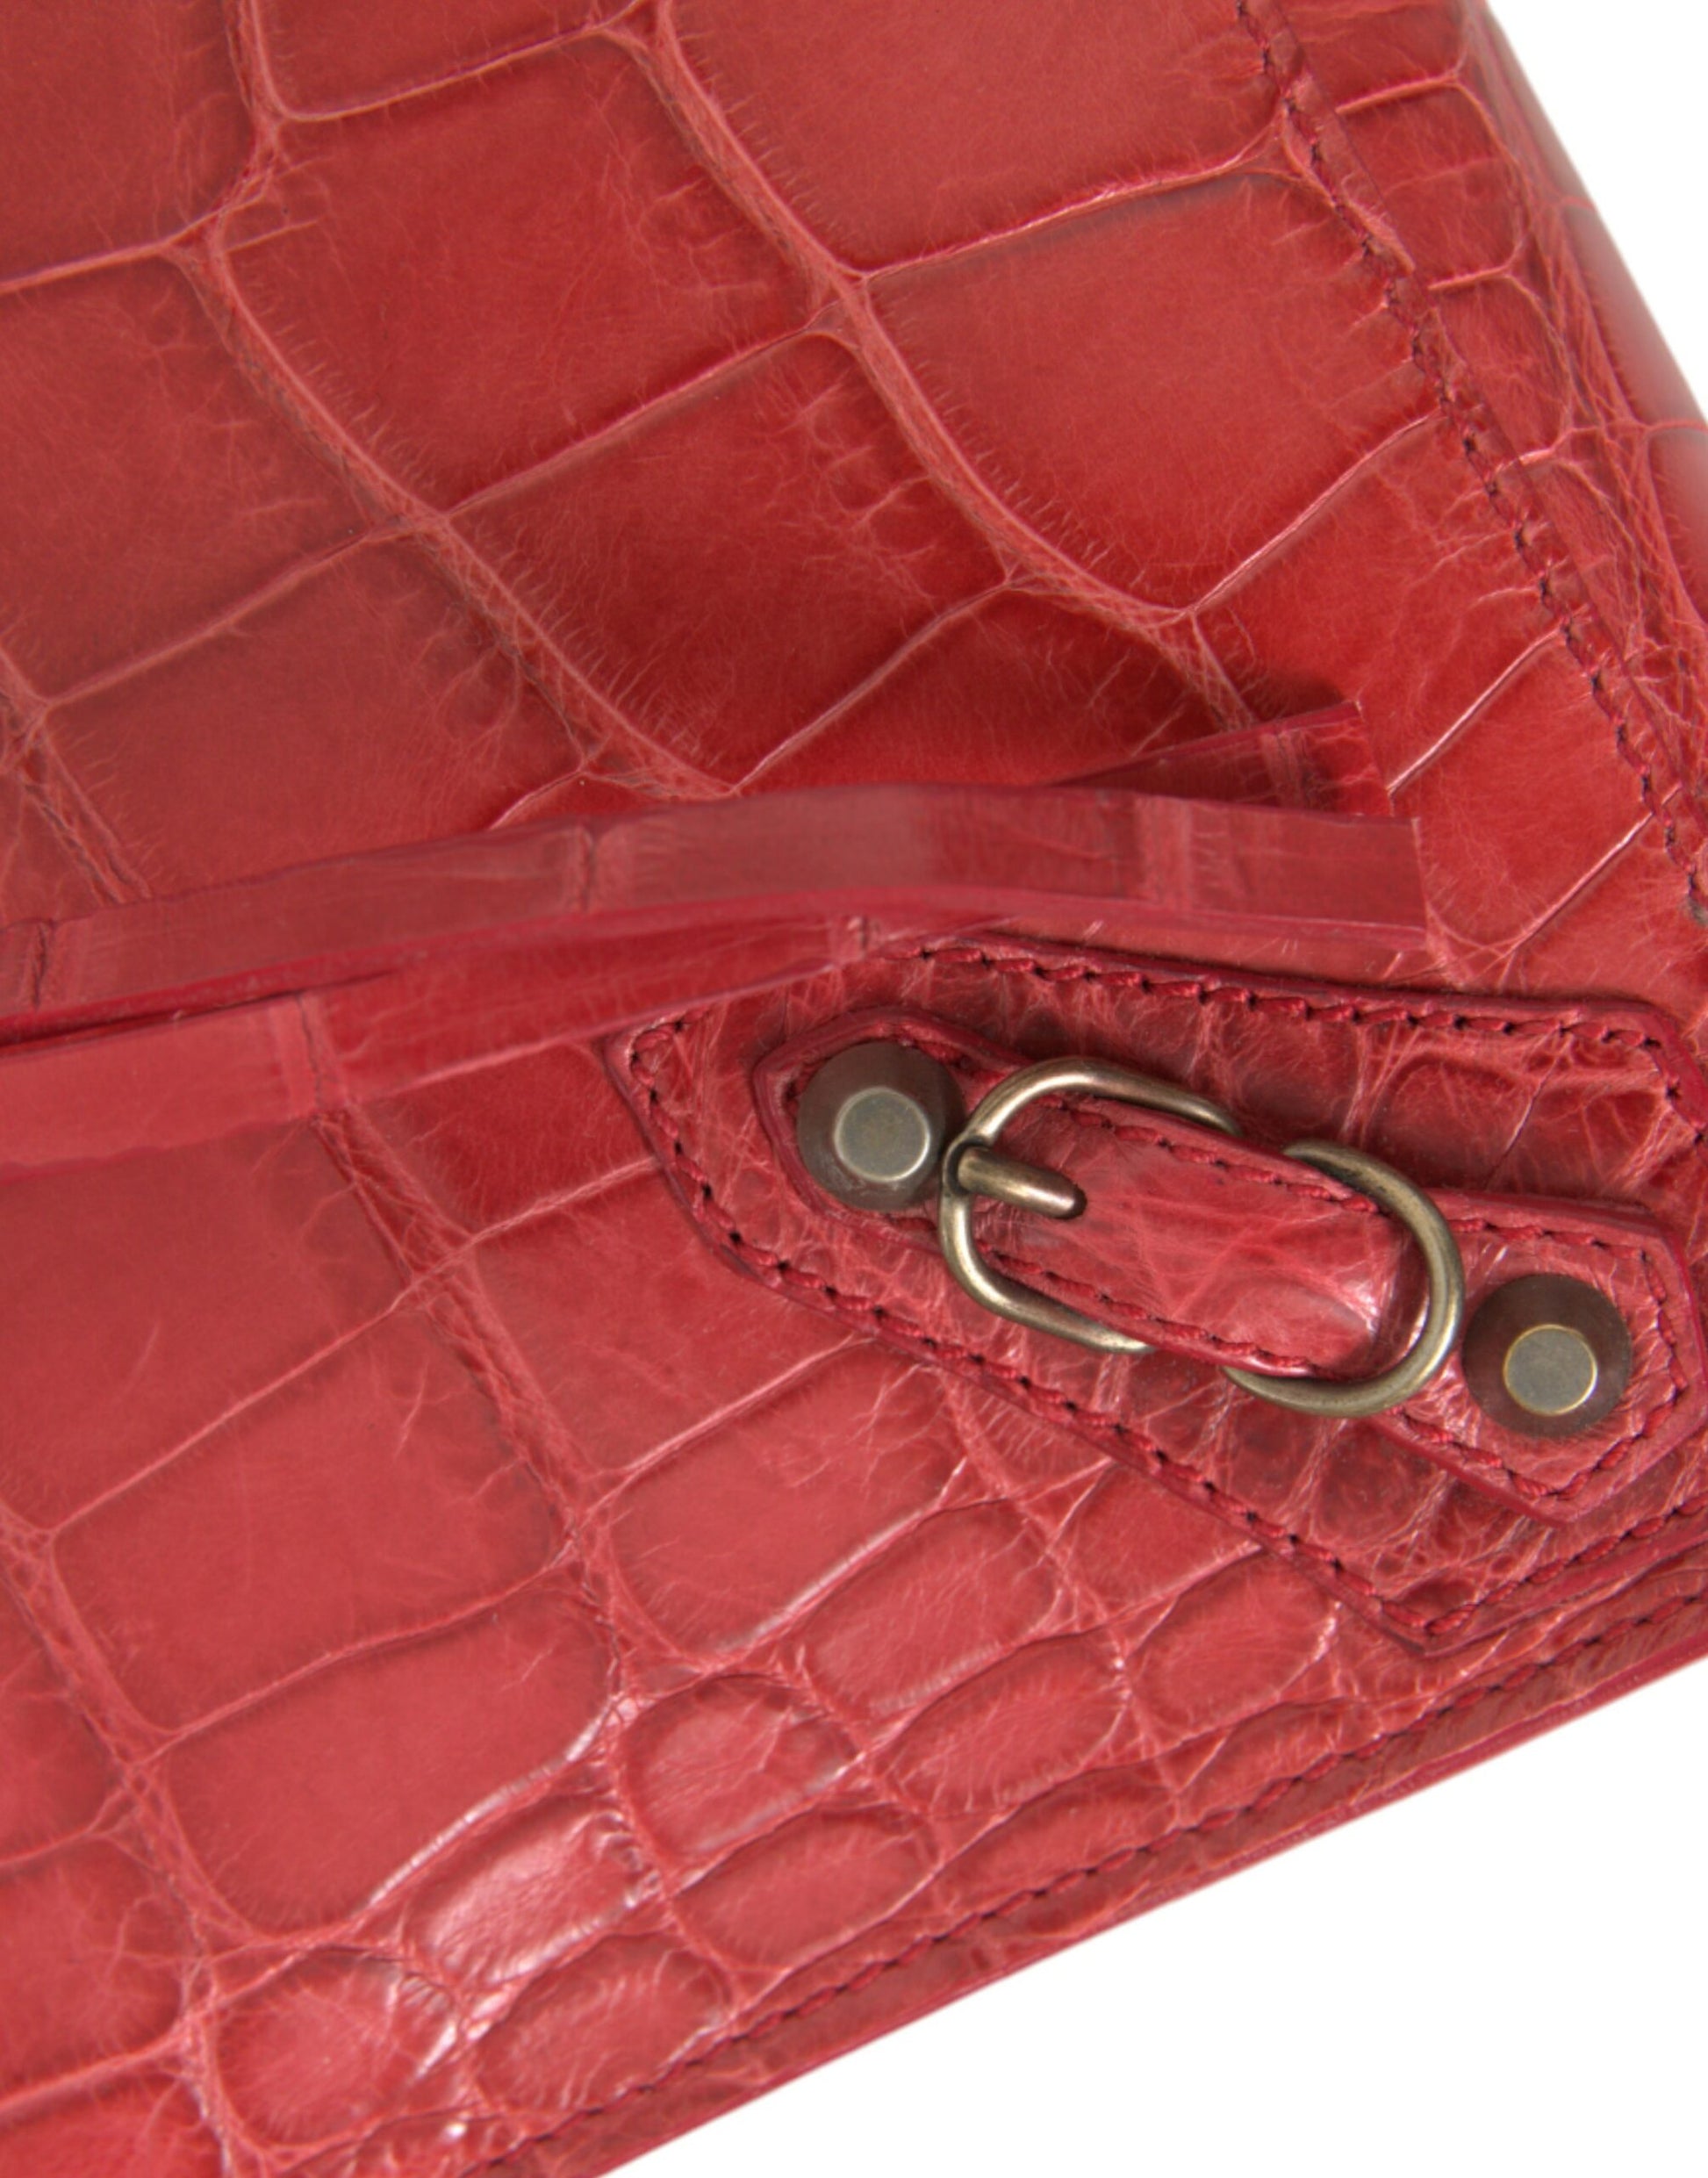 Balenciaga Exotic Red Alligator Leather Clutch - Gio Beverly Hills